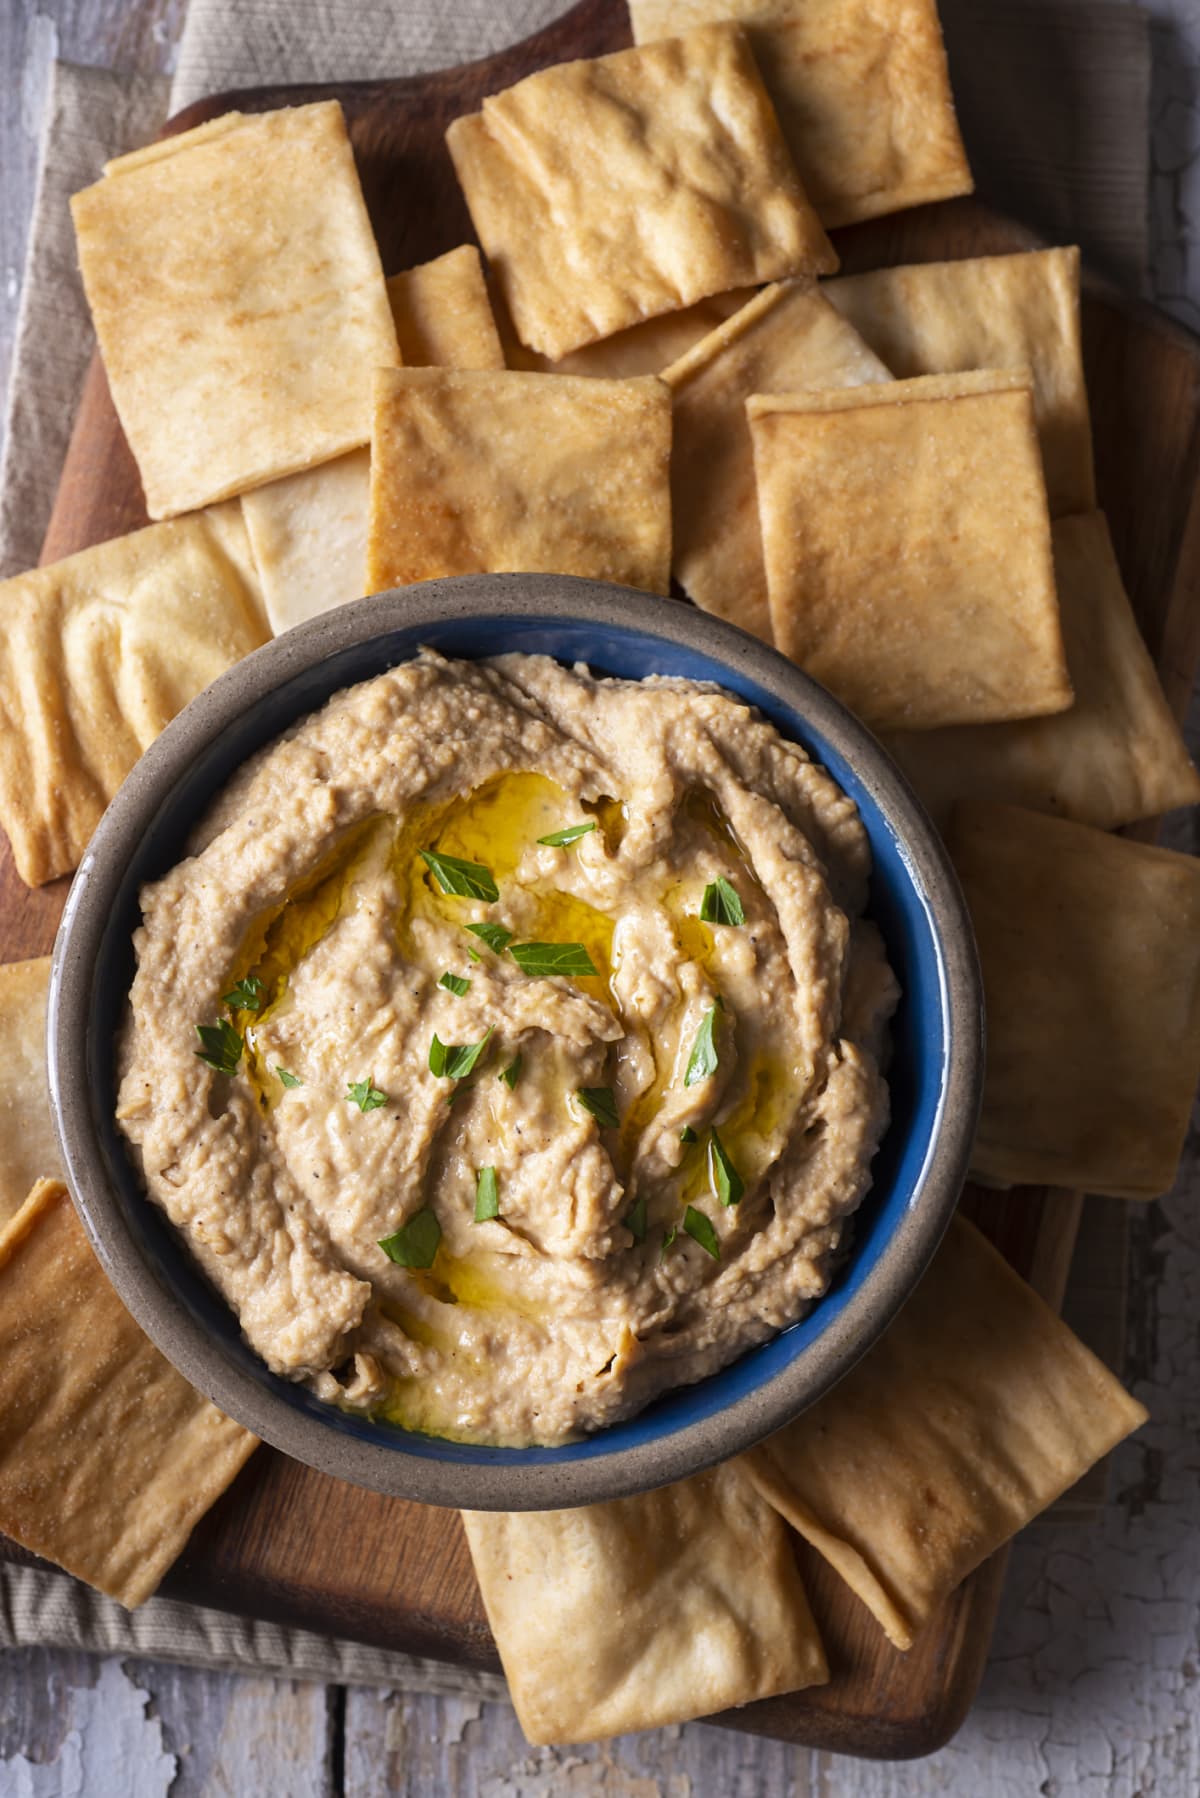 Hummus in a bowl, surrounded by pita chips.